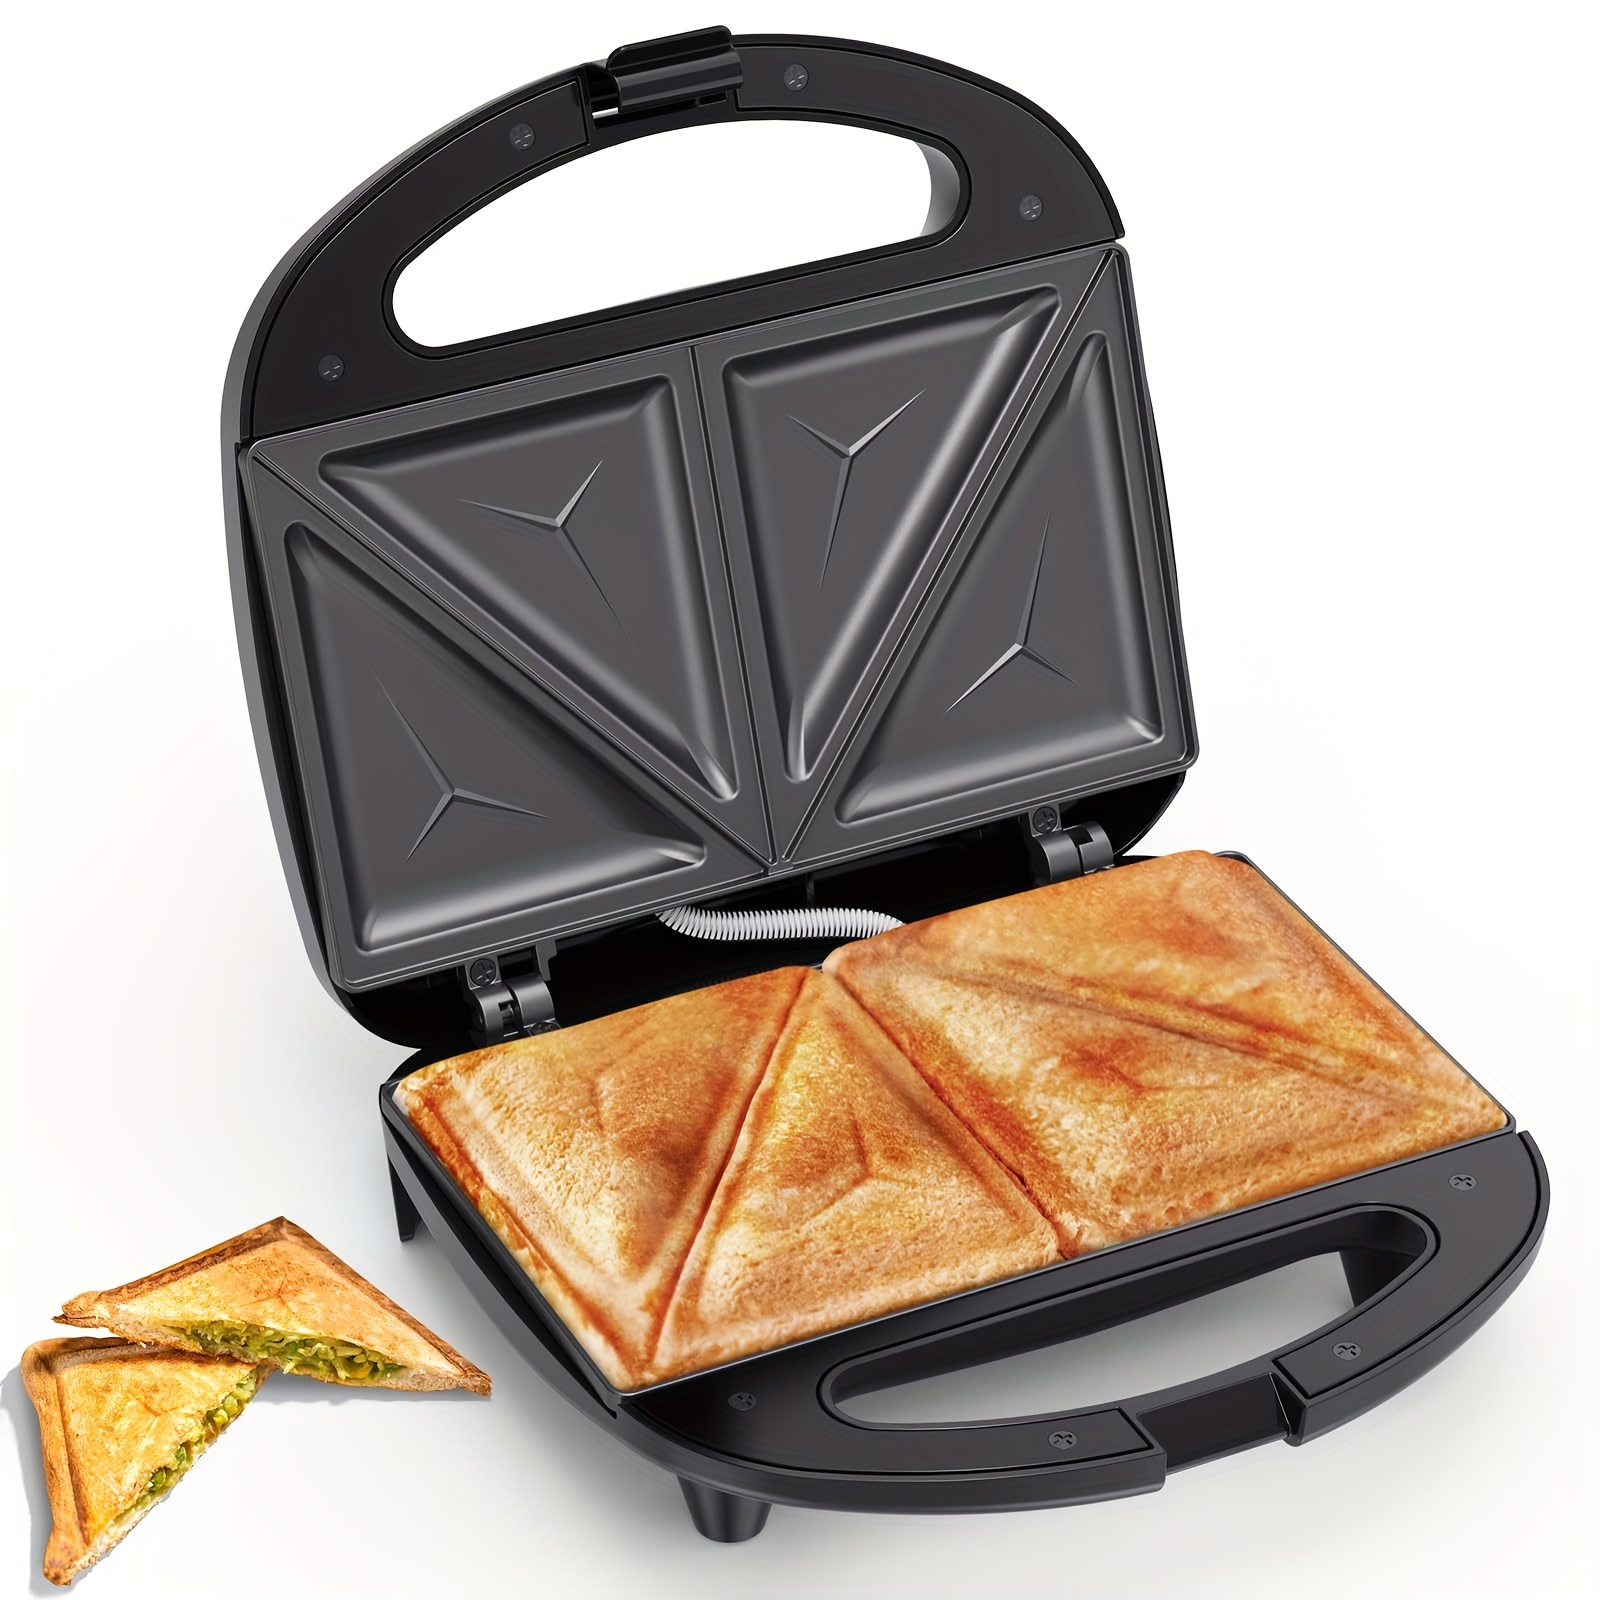 

Abs07 Sandwich Maker With Triangle Plates, 2 Slice Non-stick Maker, Indicator Lights, Cool Touch Handle, Easy To Clean And Store, 750w